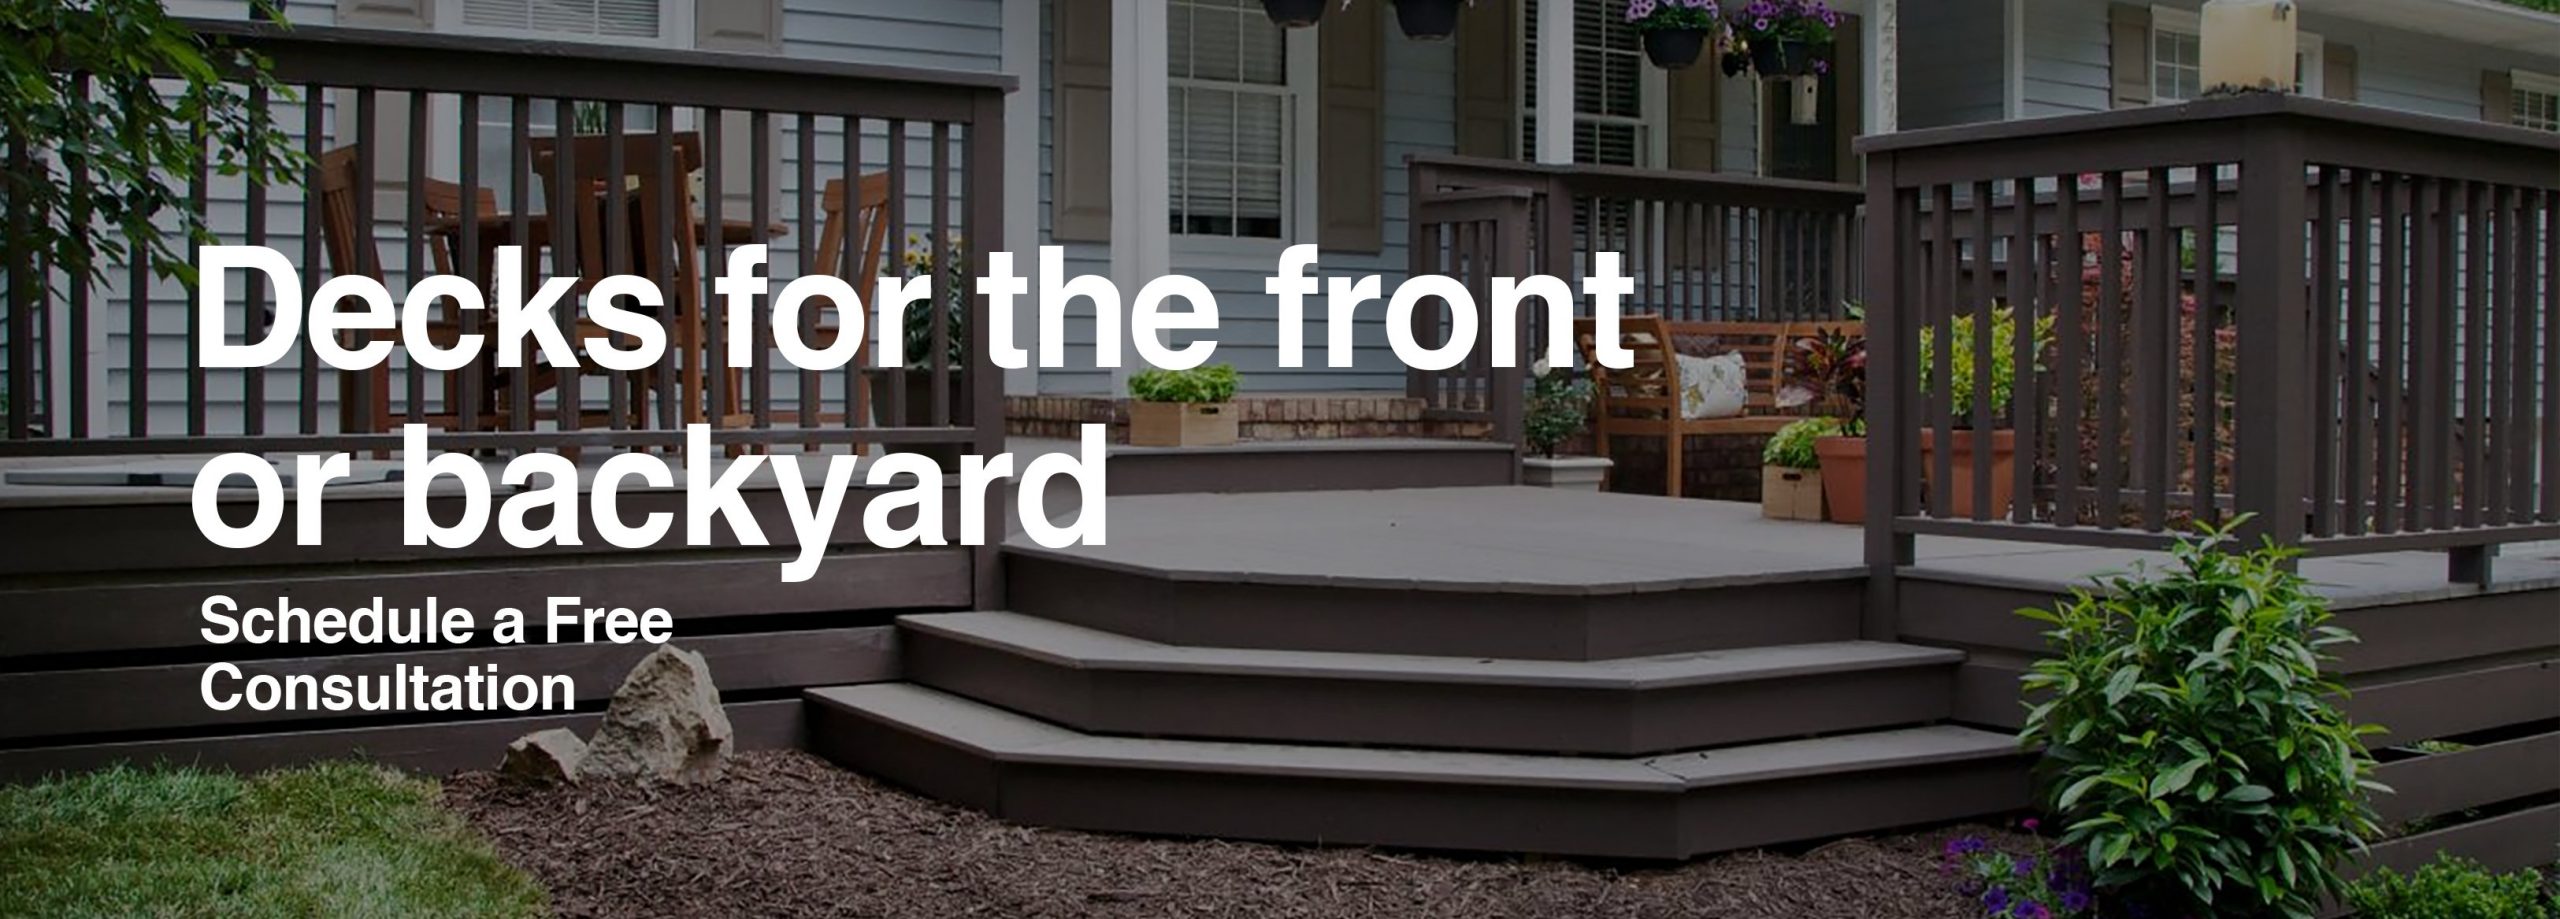 Decks for the Front or Backyard